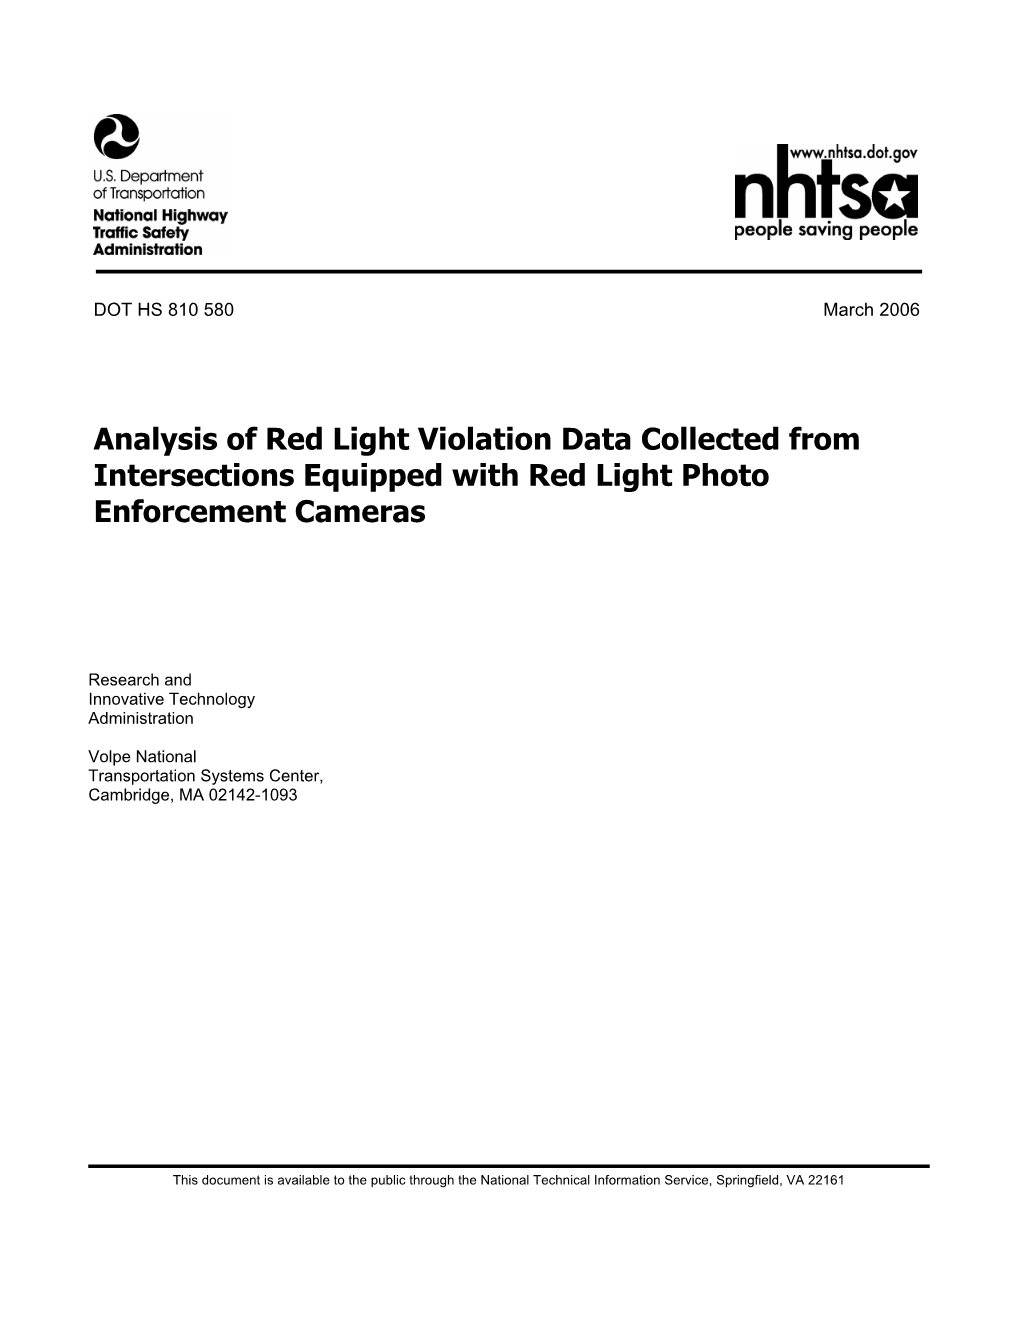 Analysis of Red Light Violation Data Collected from Intersections Equipped with Red Light Photo Enforcement Cameras